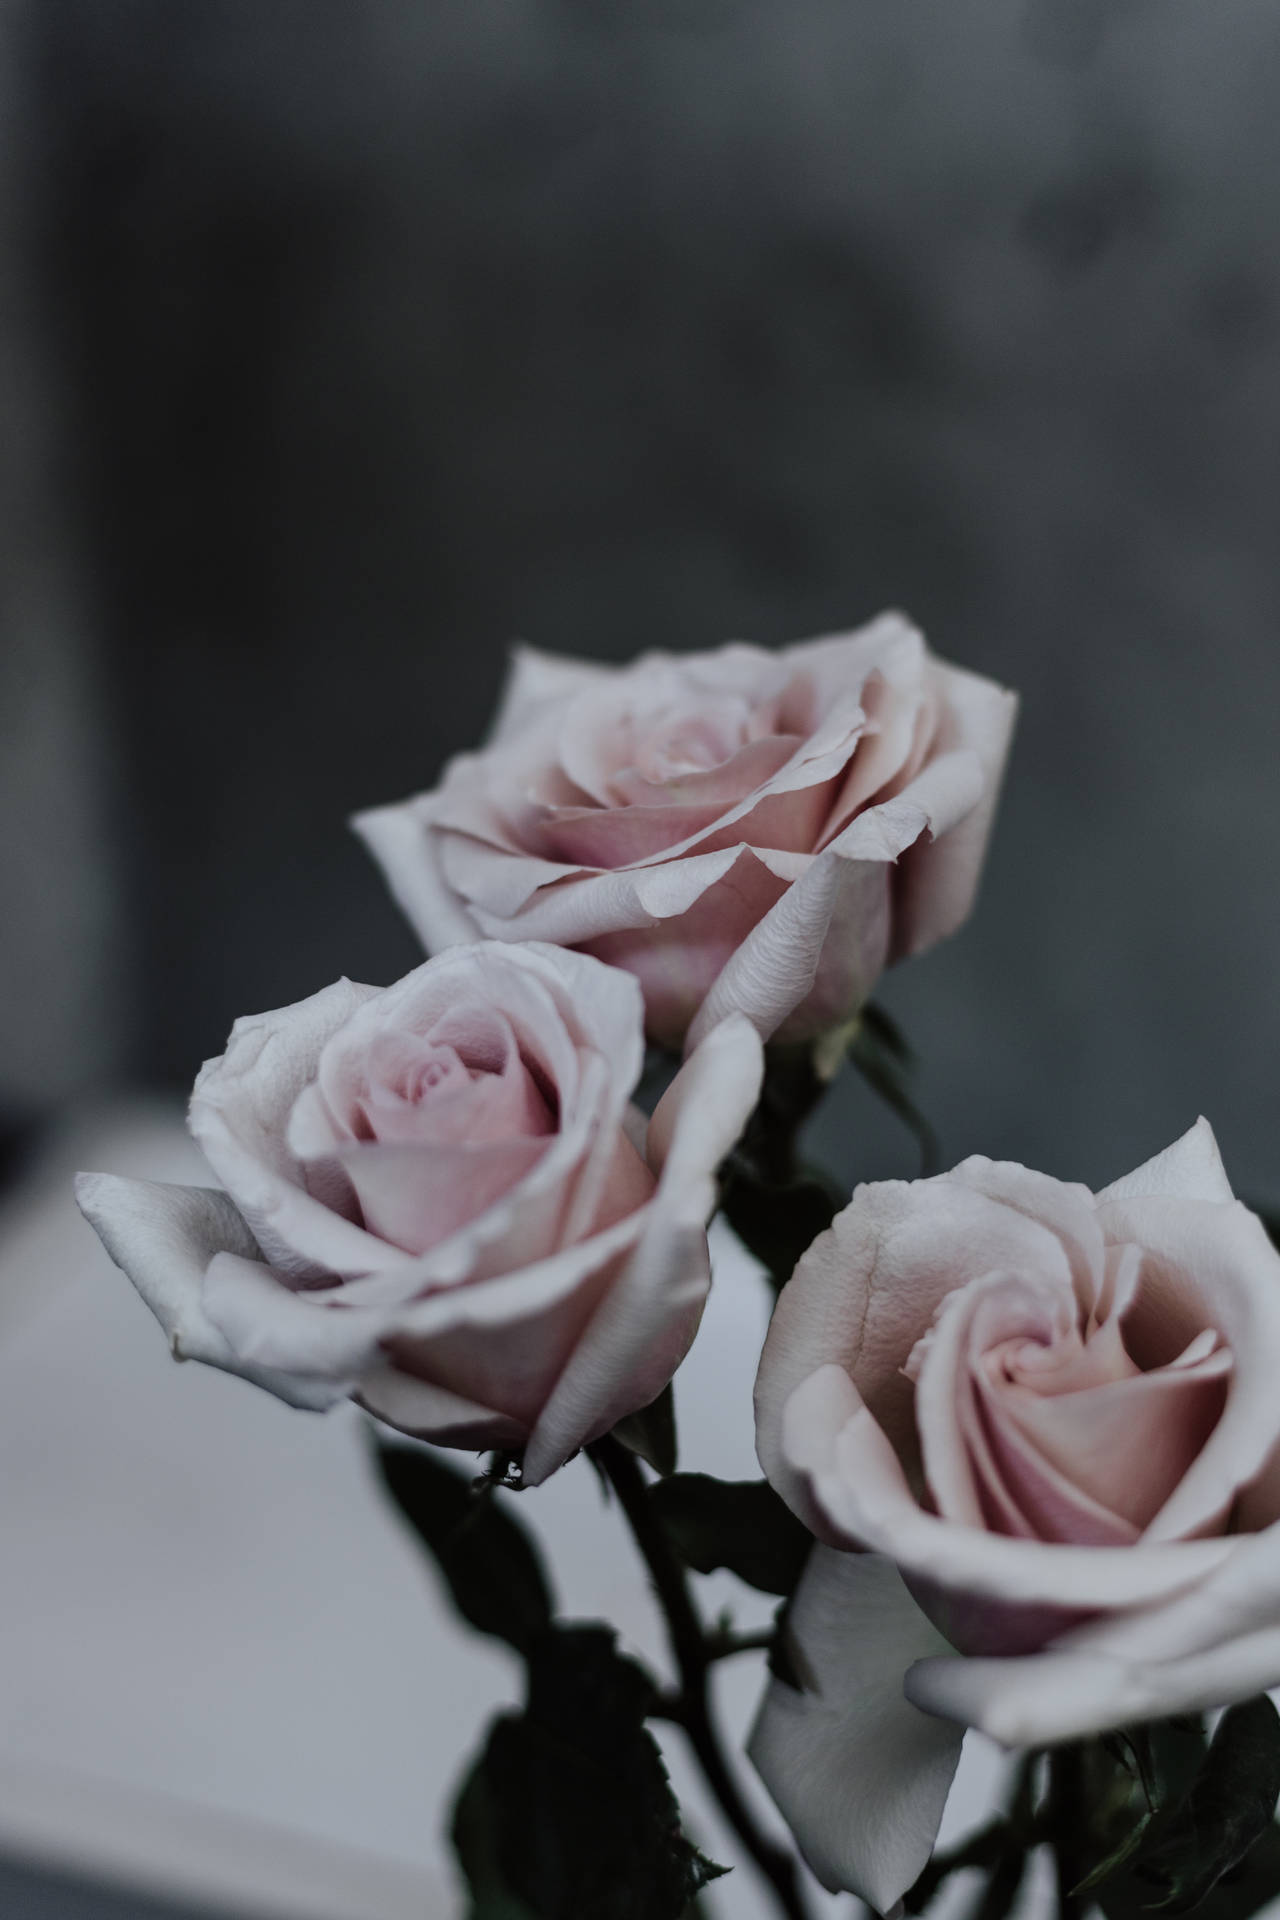 Celebrate your mother this Mothers Day with these three beautiful pink roses Wallpaper